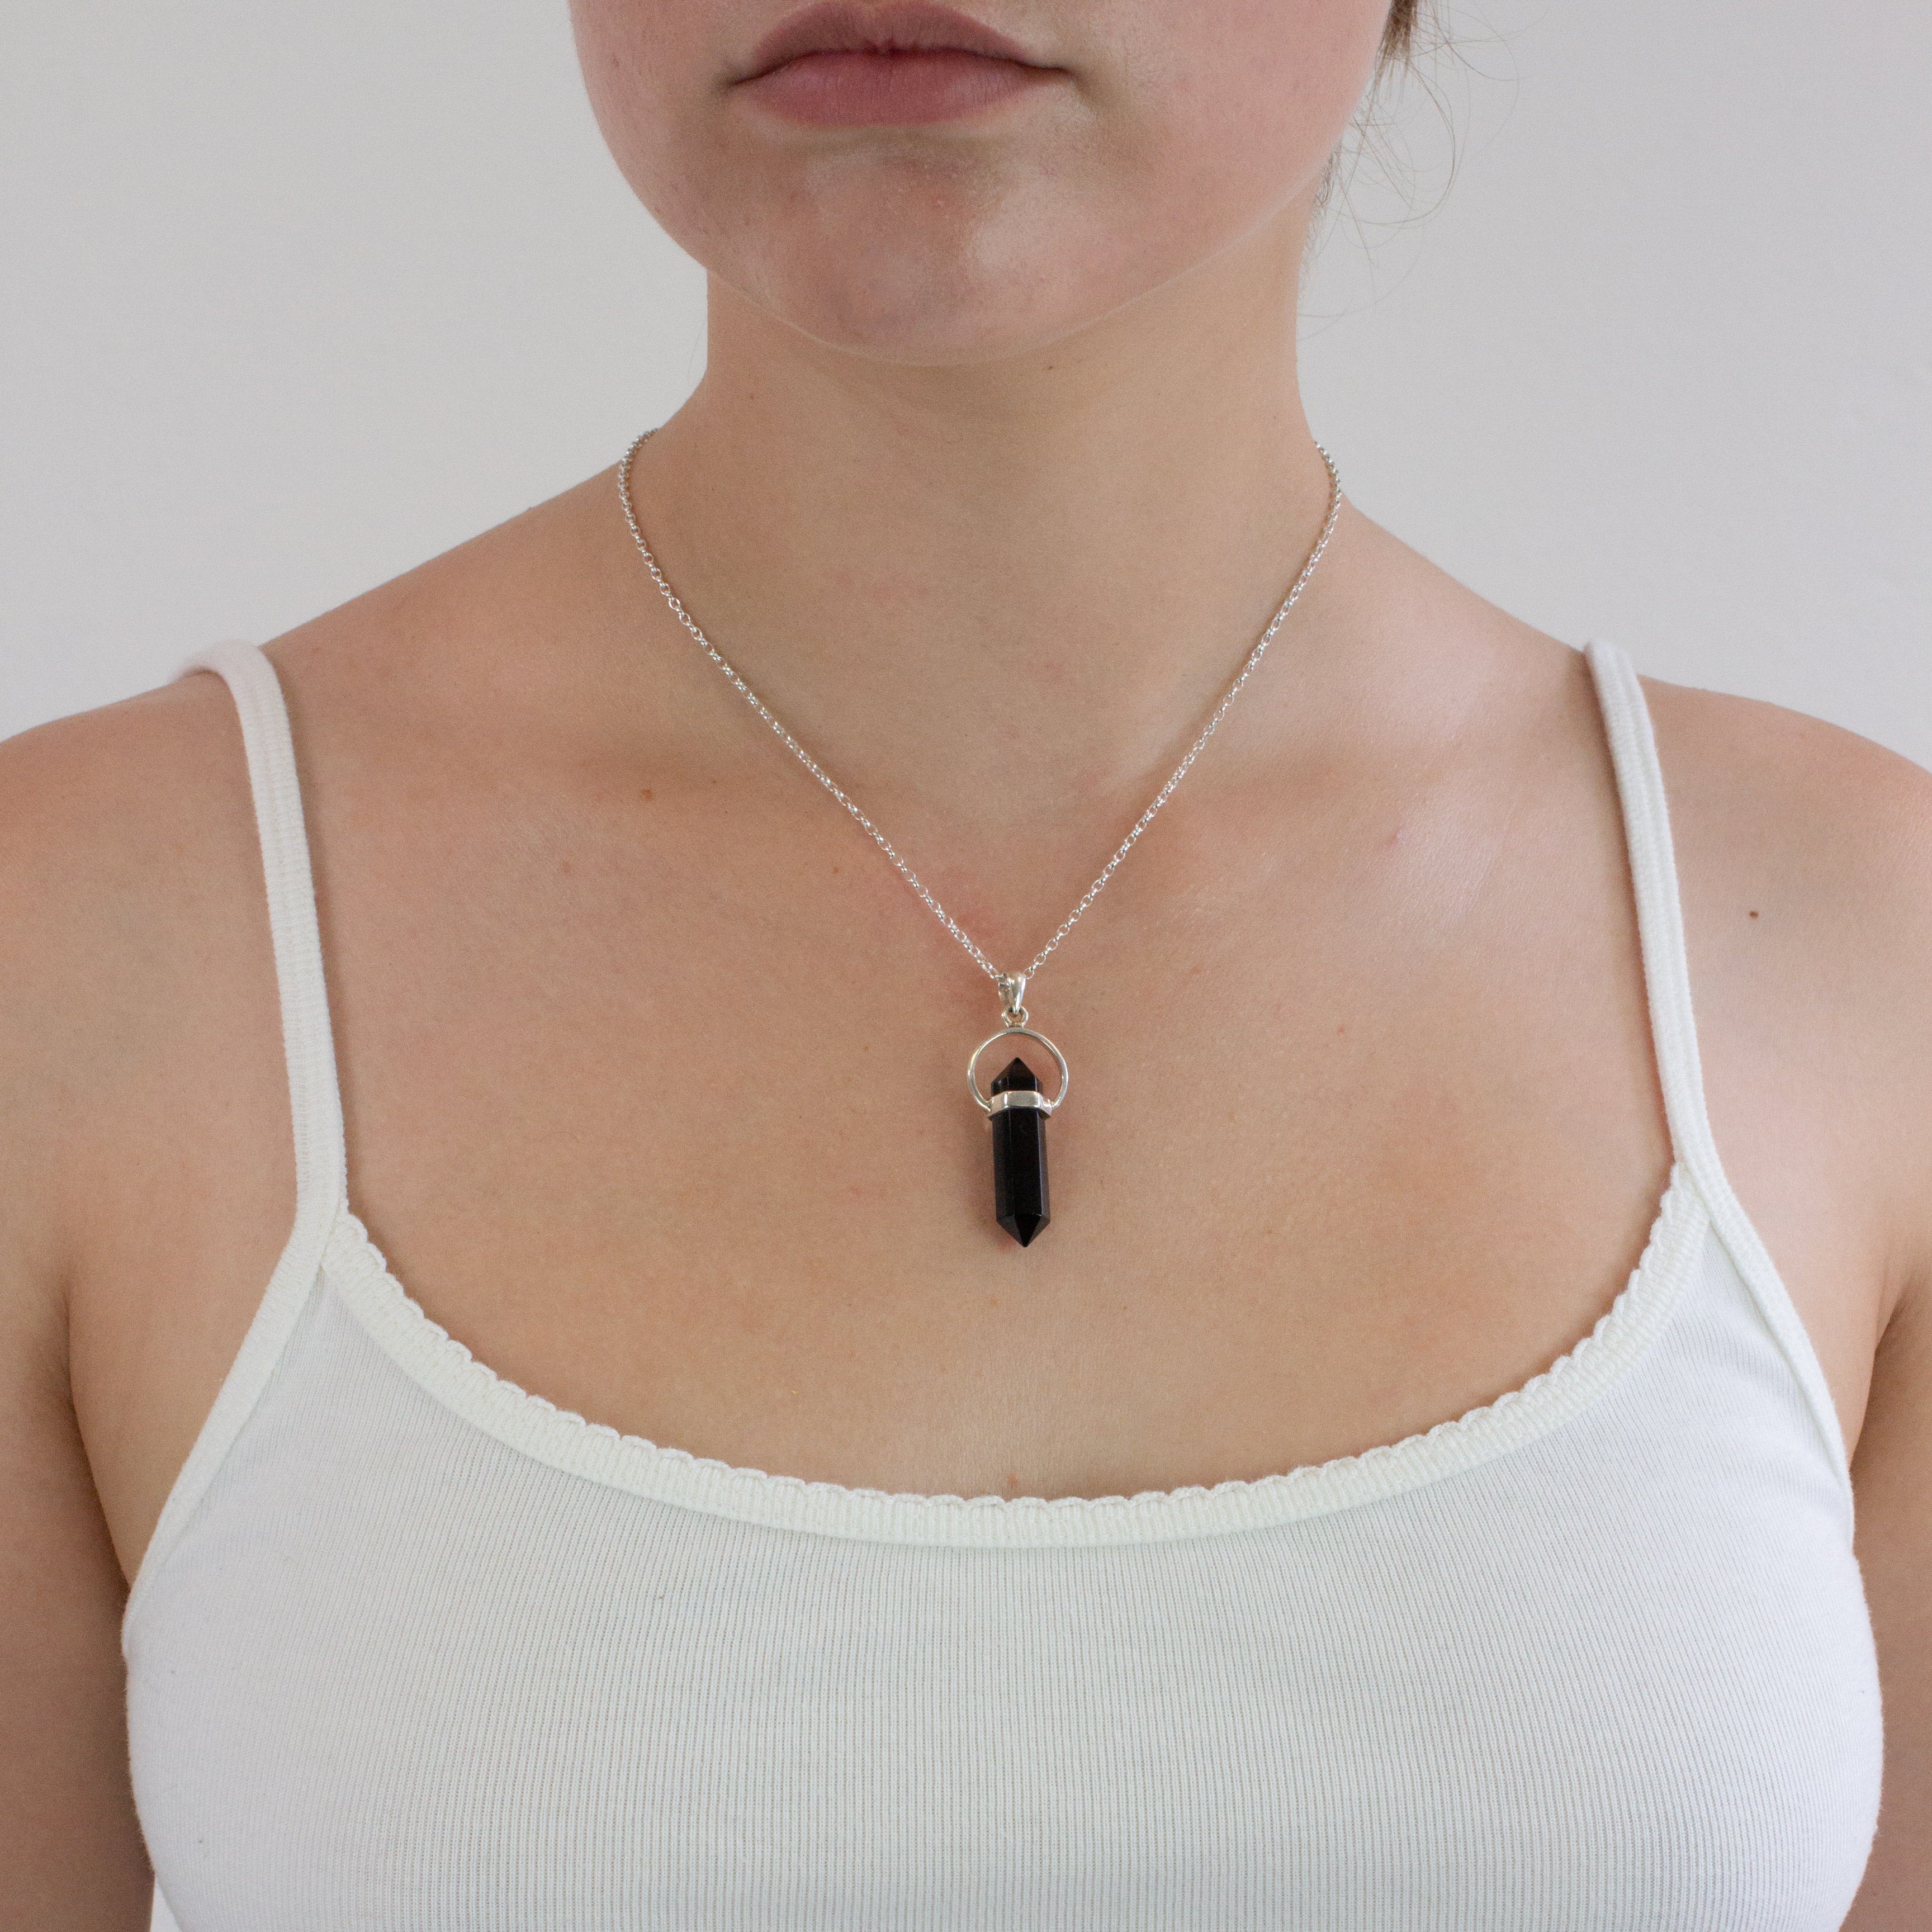 Faceted Pencil Black Tourmaline necklace on model